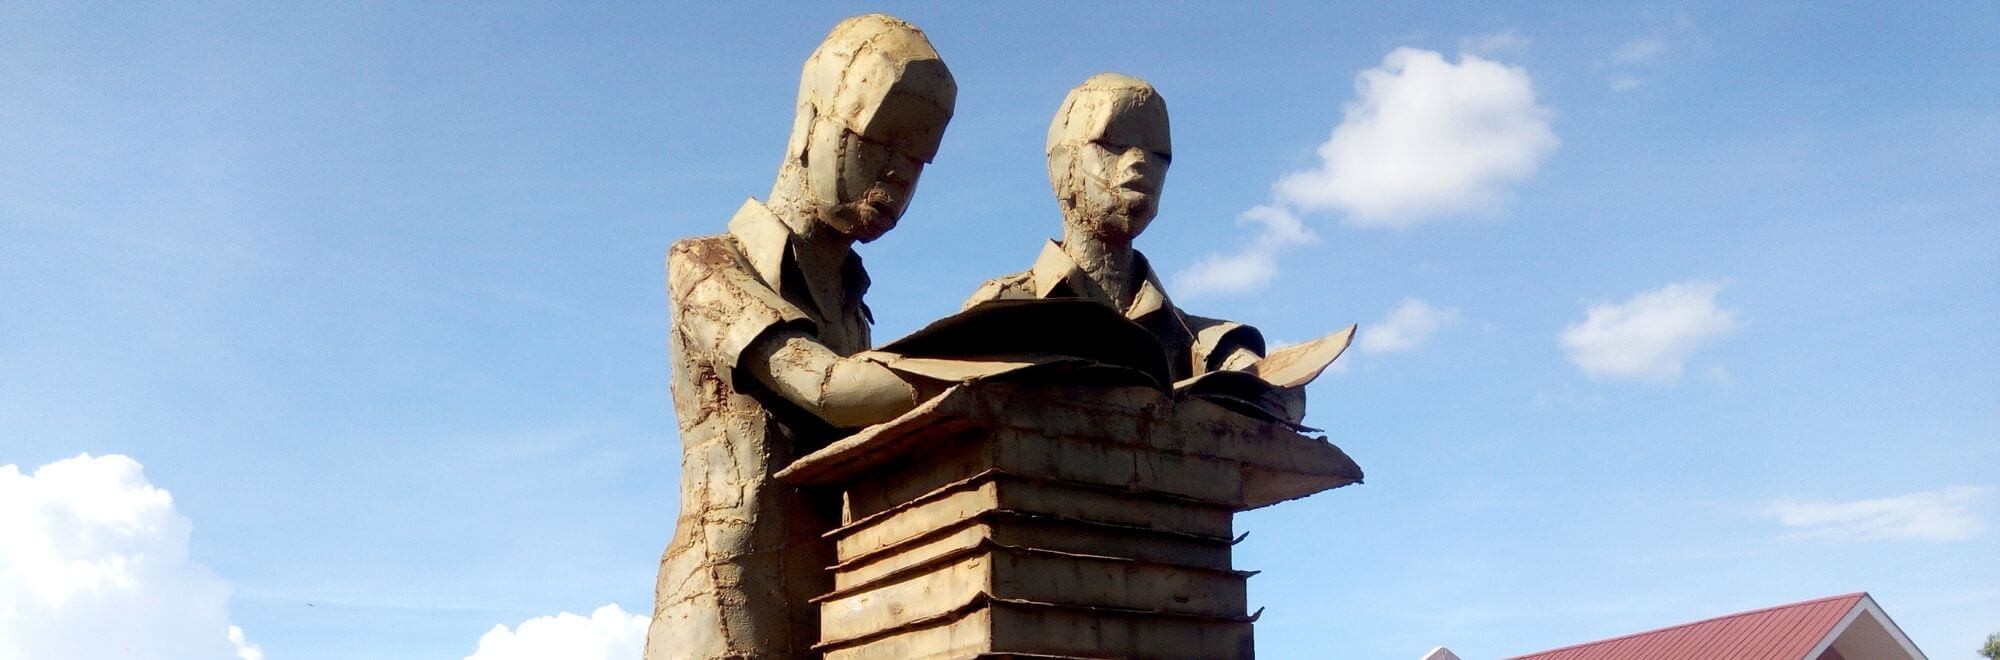 monument in honor of the end of the LRA's presence in uganda